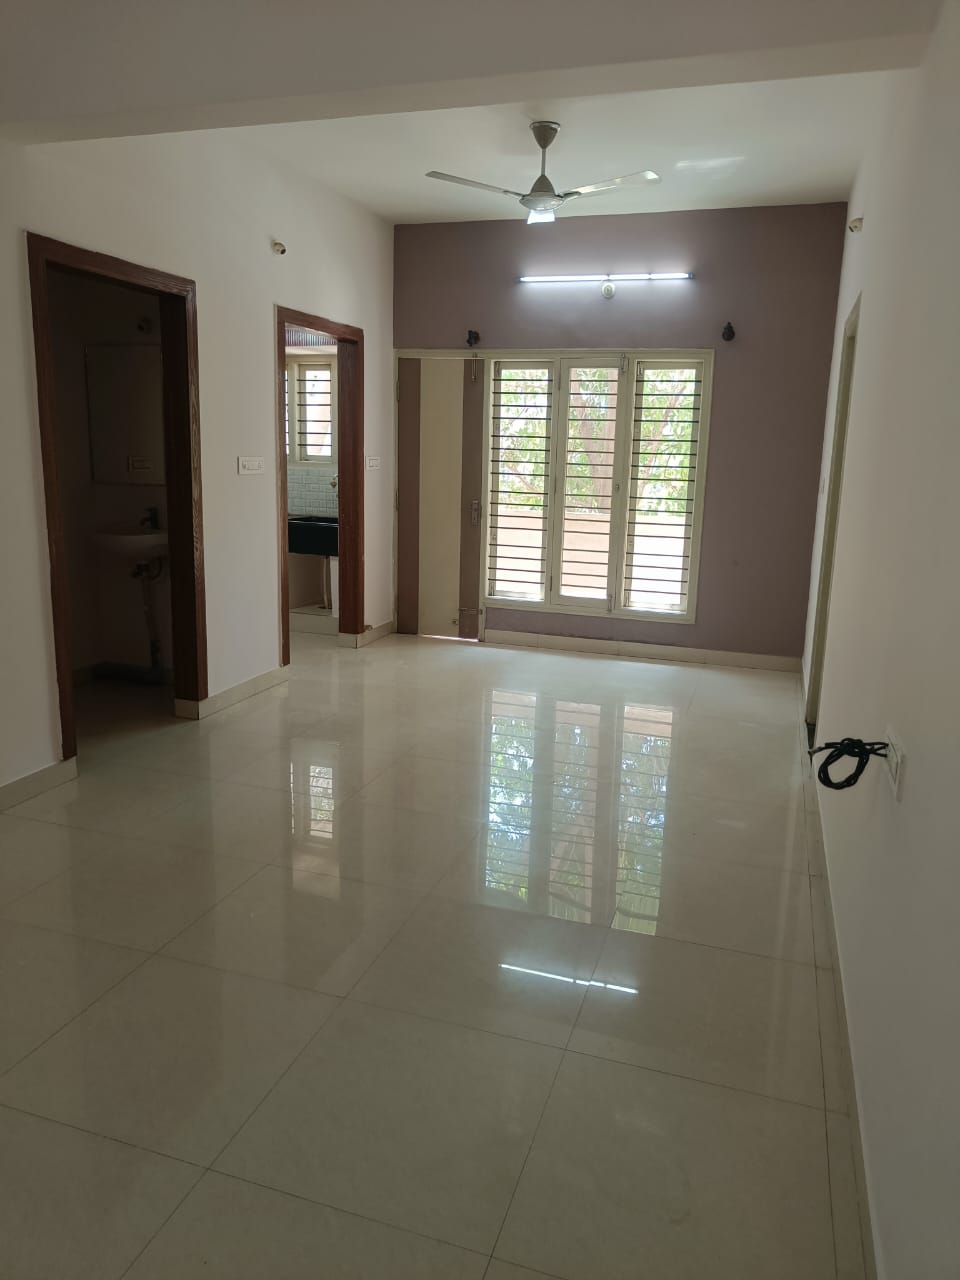 3 BHK Independent House for Lease Only at JAML2 - 2493 in Vidyaranyapura